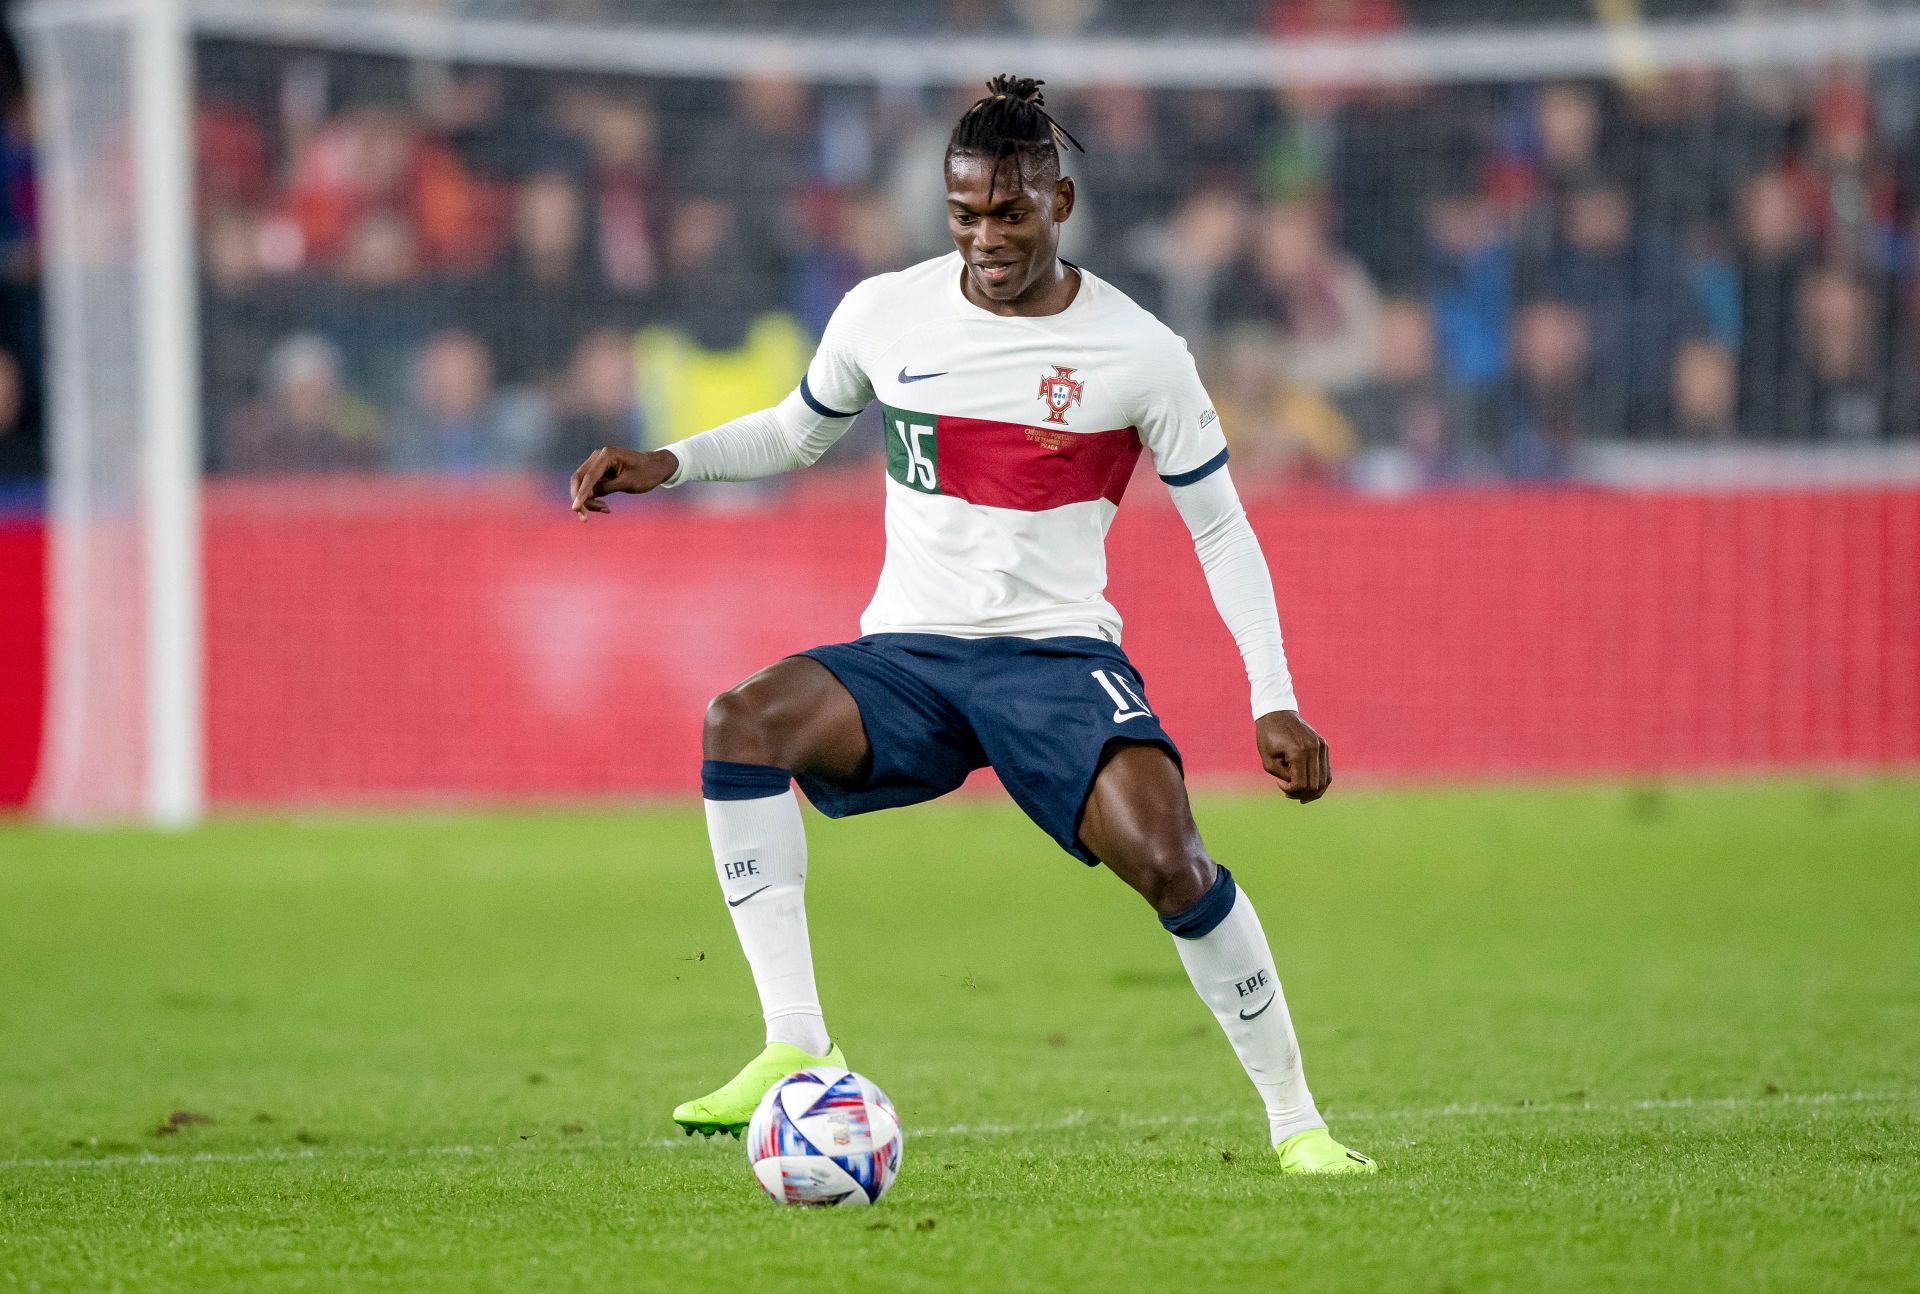 Leao was selected by Portugal for the FIFA World Cup in Qatar